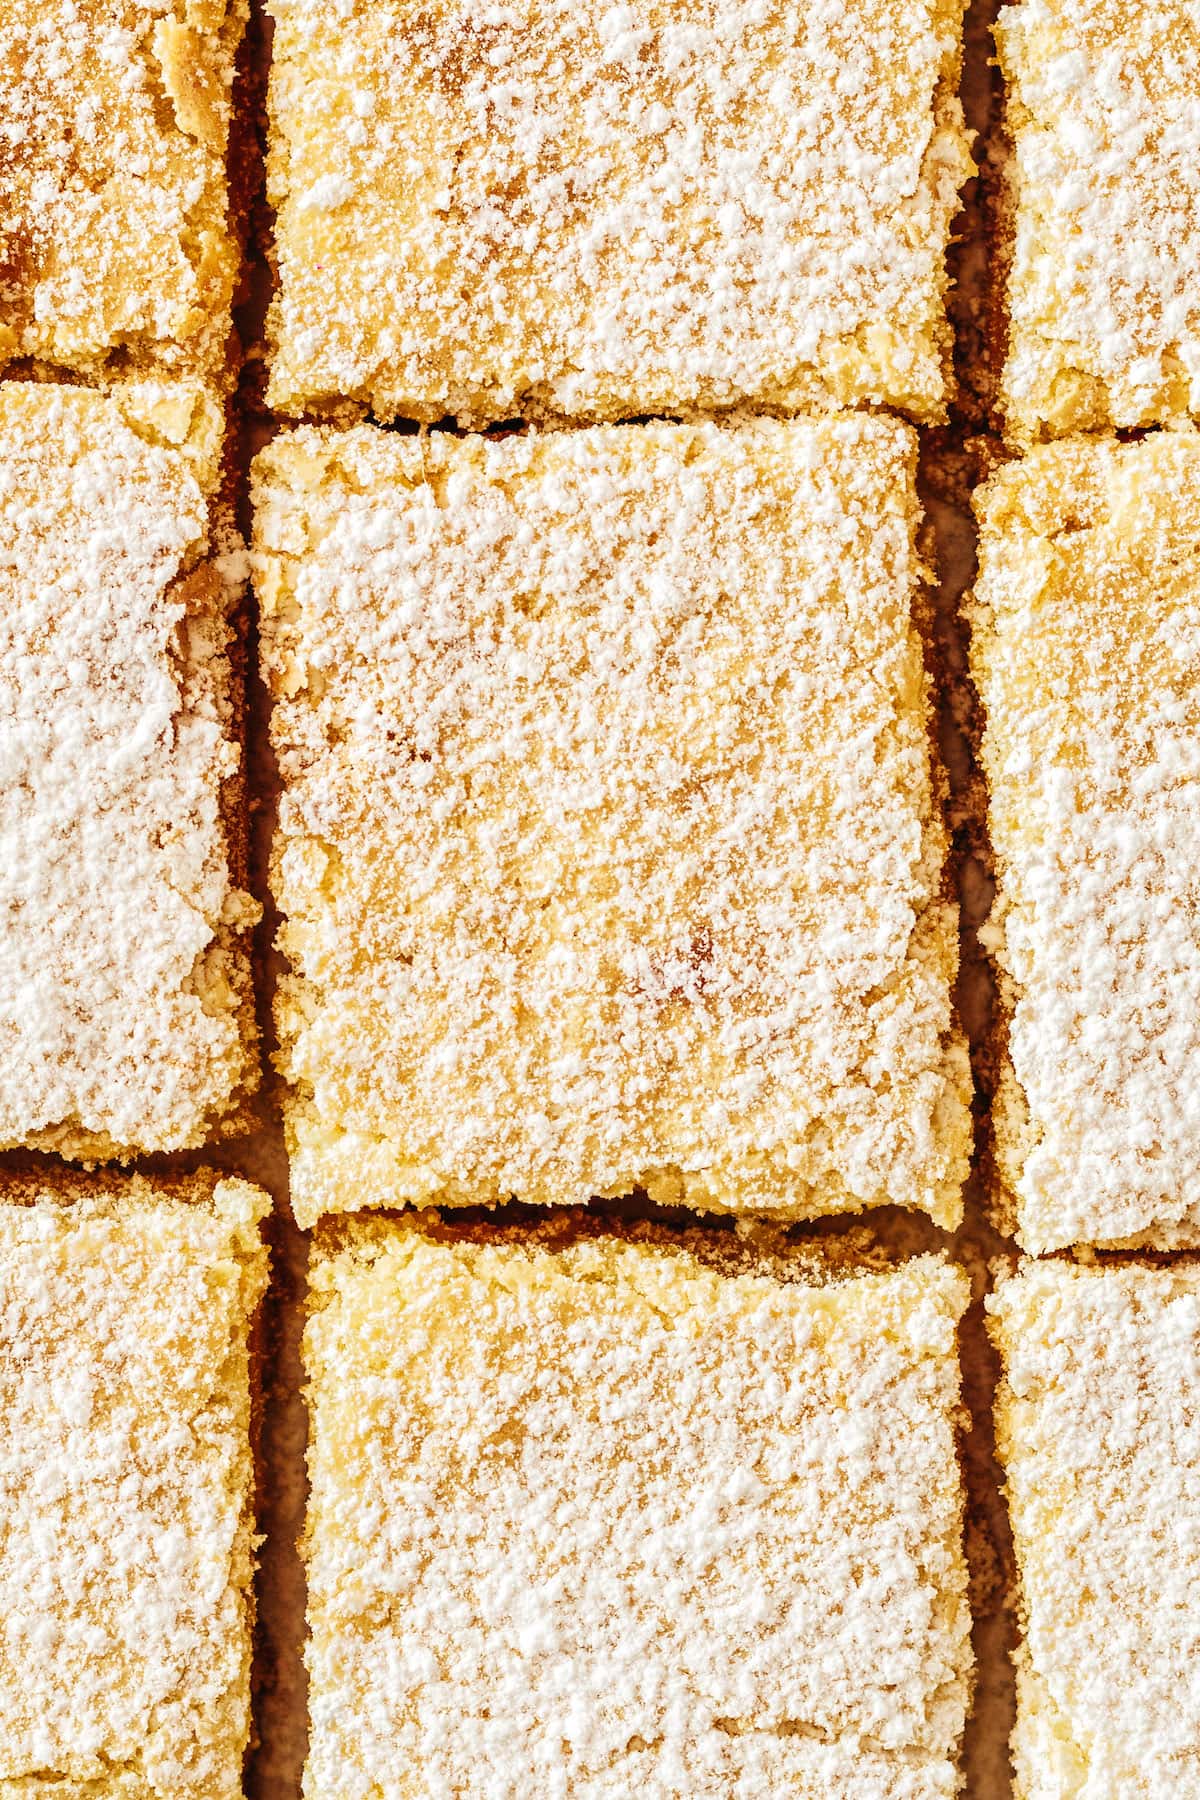 Overhead view of lemon bars dusted with powdered sugar after cutting